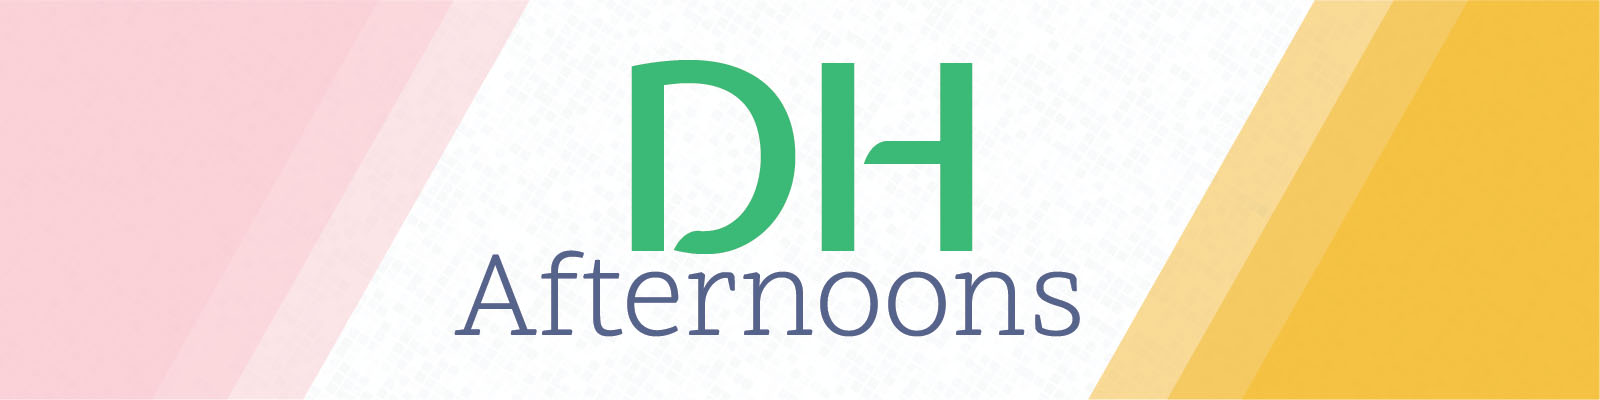 DH Afternoons Banner Image